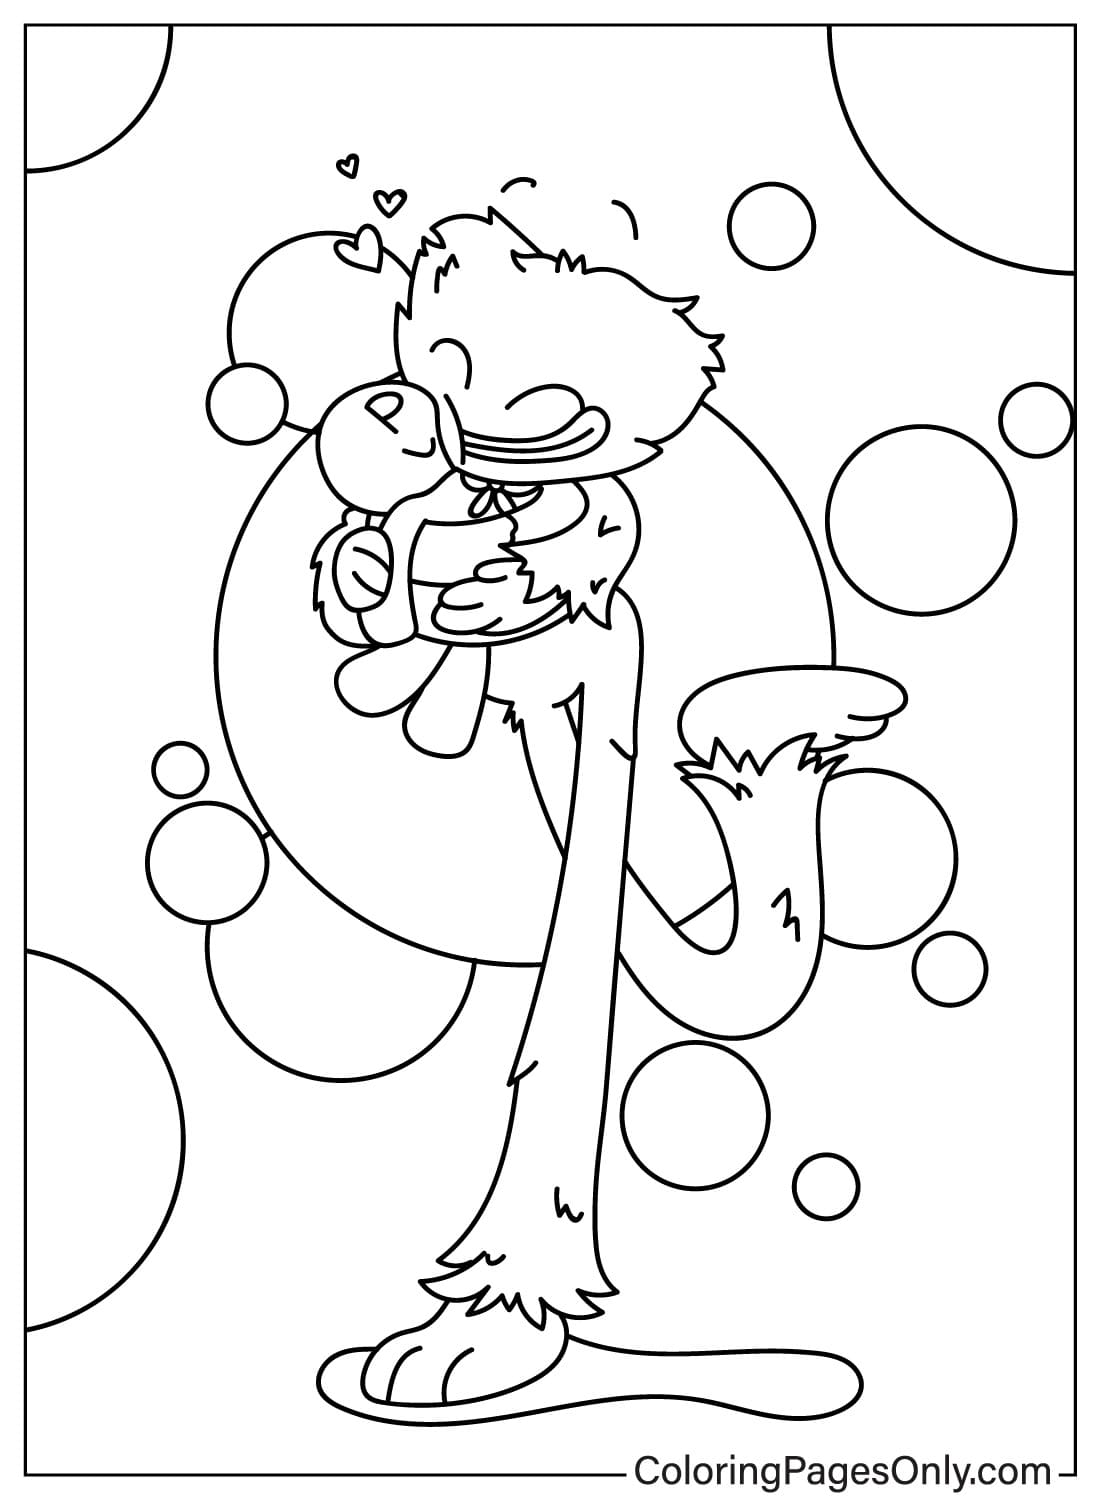 Huggy Wuggy Coloring Page Free Printable from Poppy Playtime